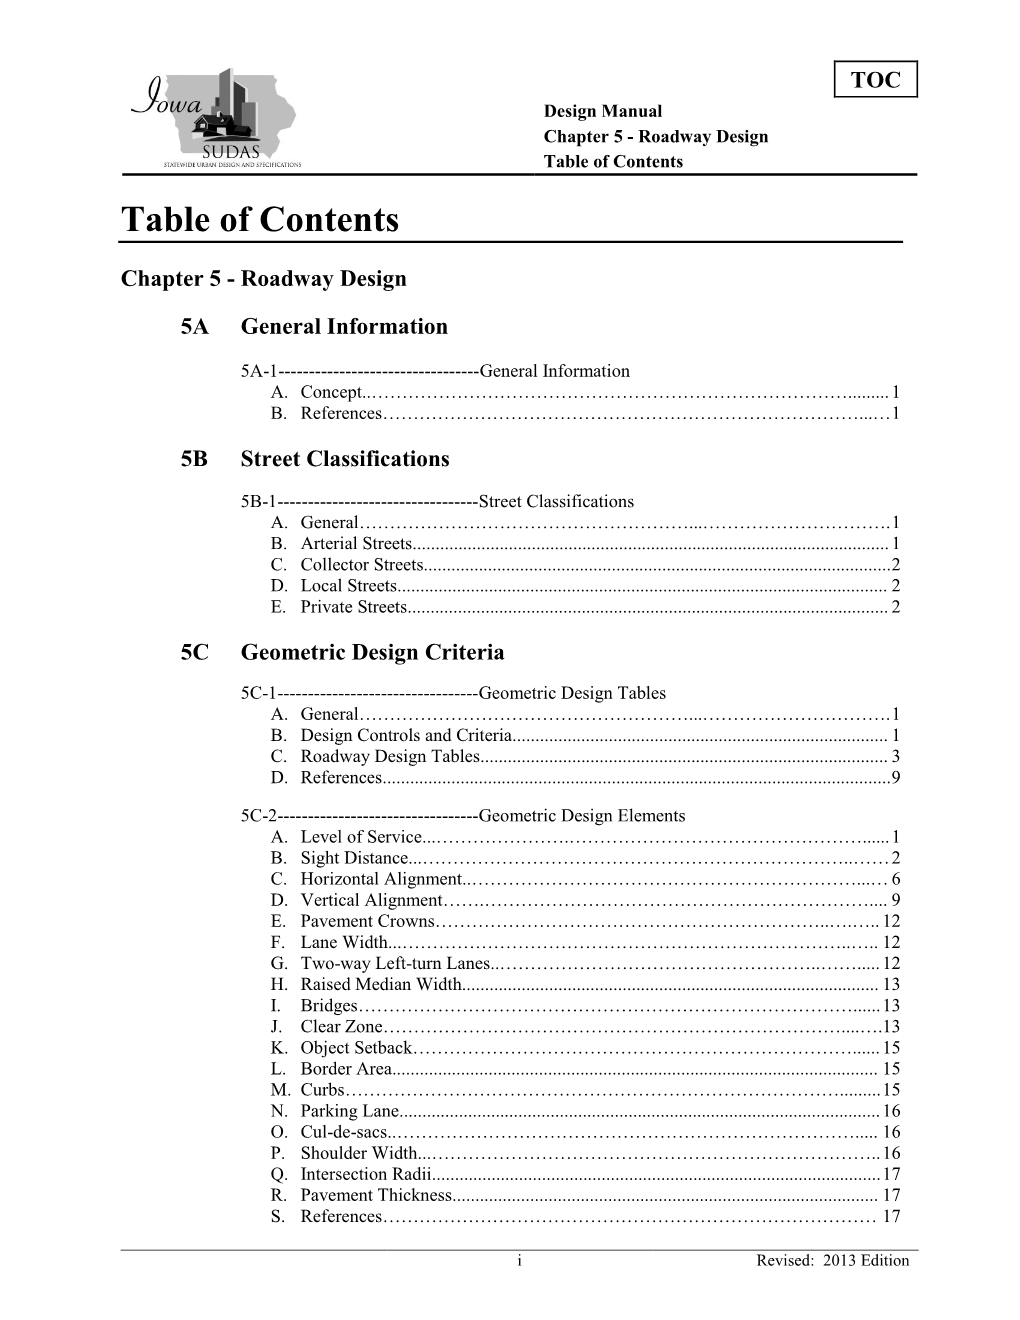 Chapter 5 - Roadway Design Table of Contents